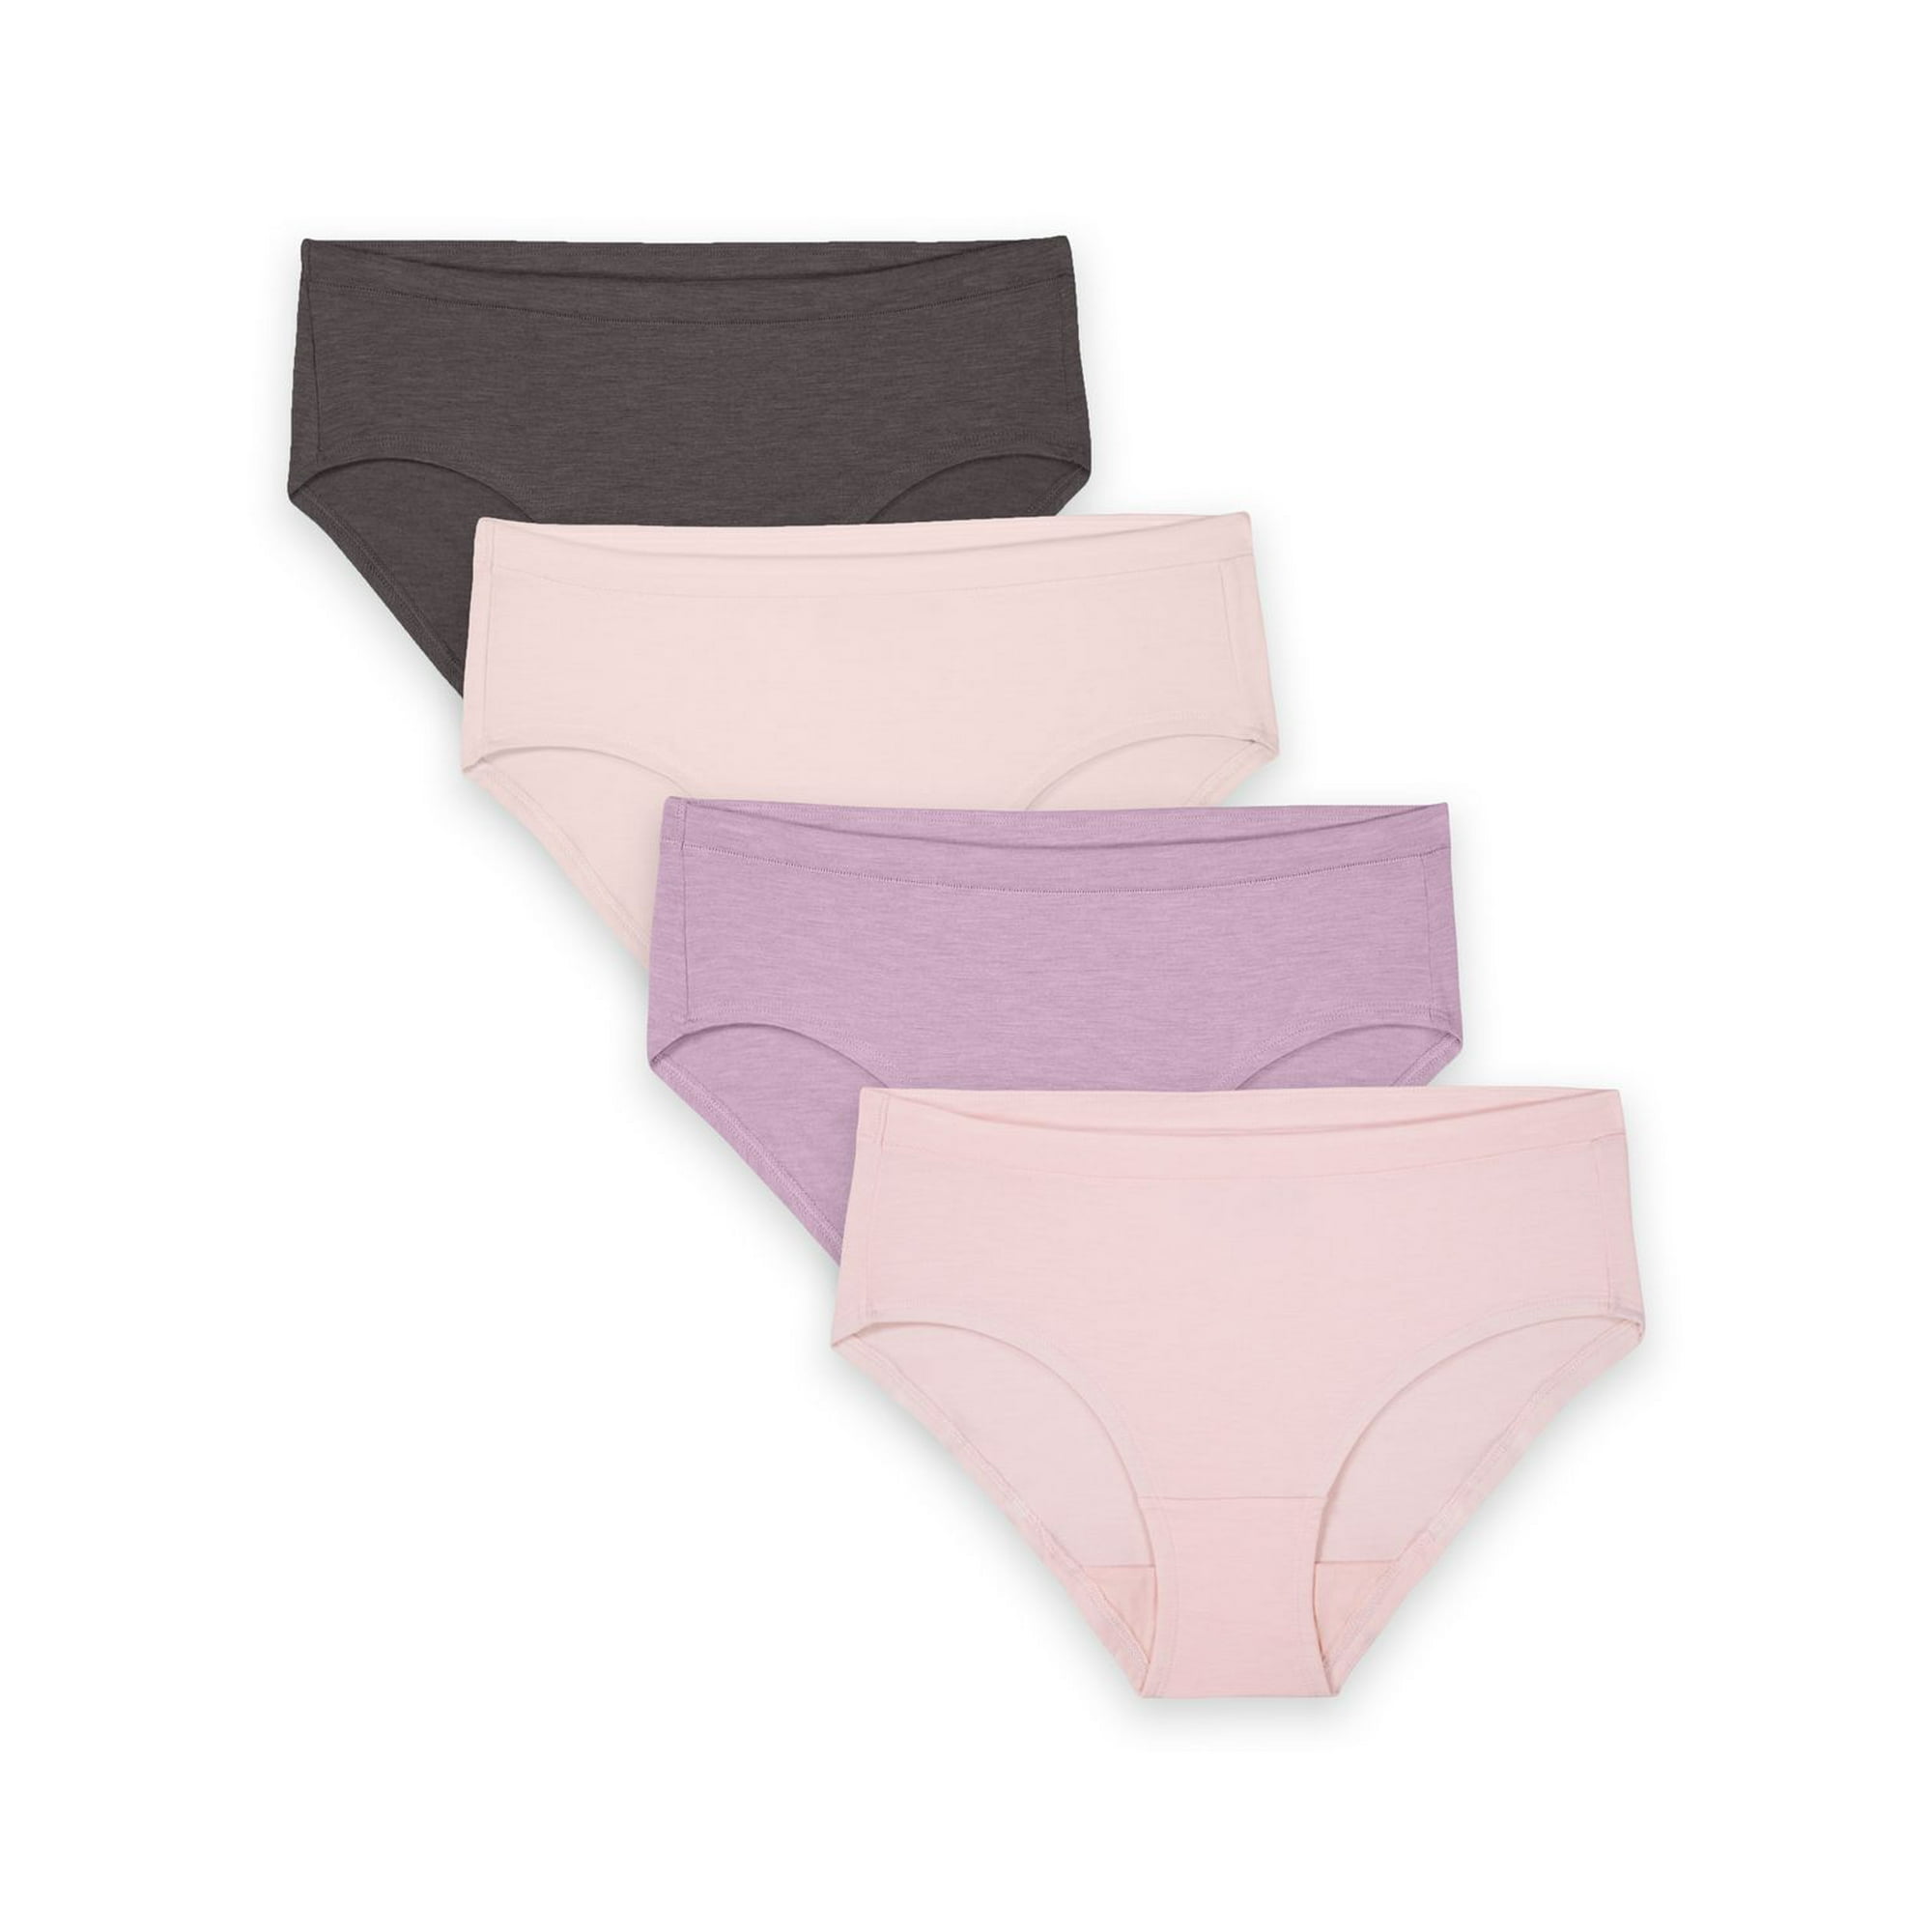 Fruit of the Loom Women's Ultra Soft Modal Hipster Underwear, 4 pack,  Sizes: 5 - 8